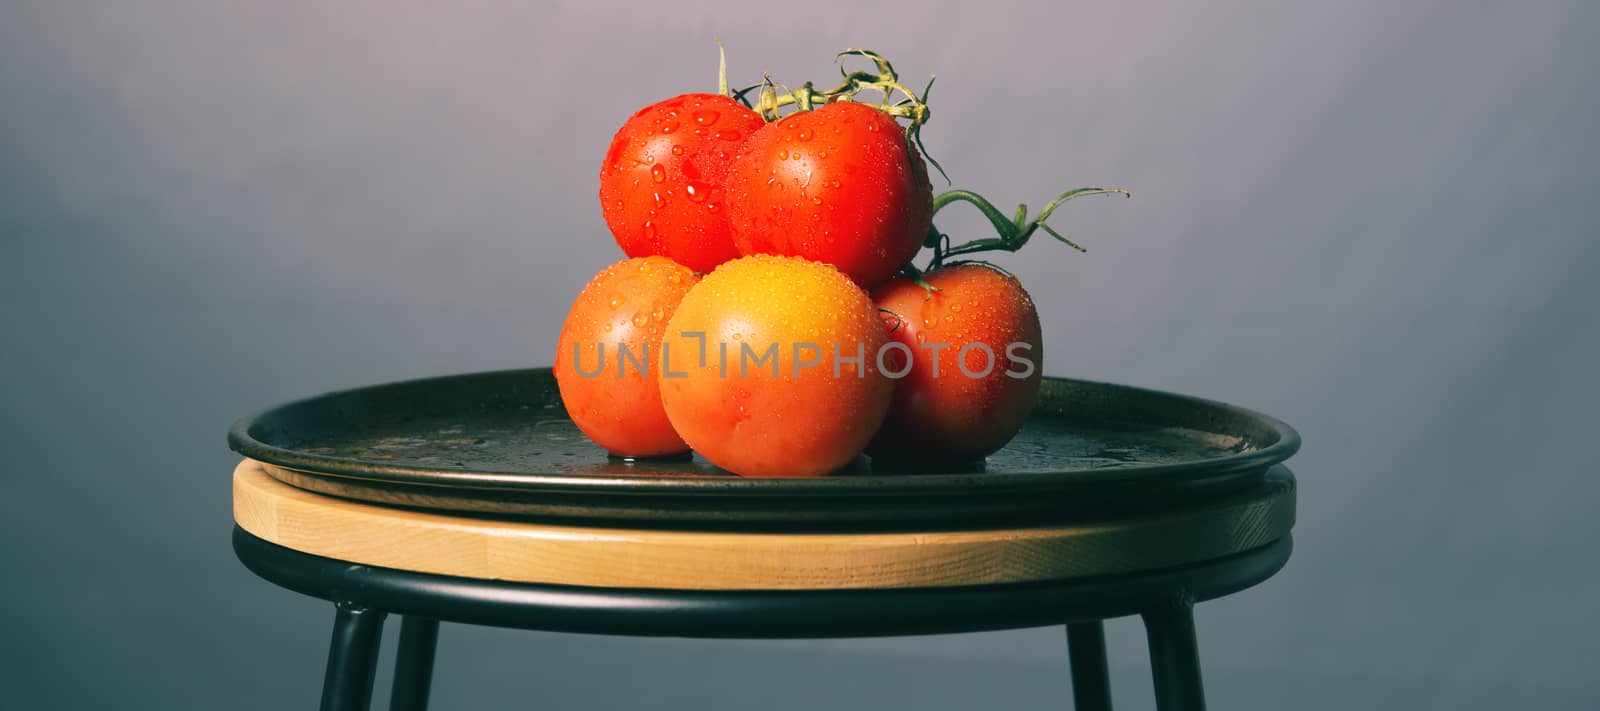 Red ripe fresh tomatoes on a metal baking tray.